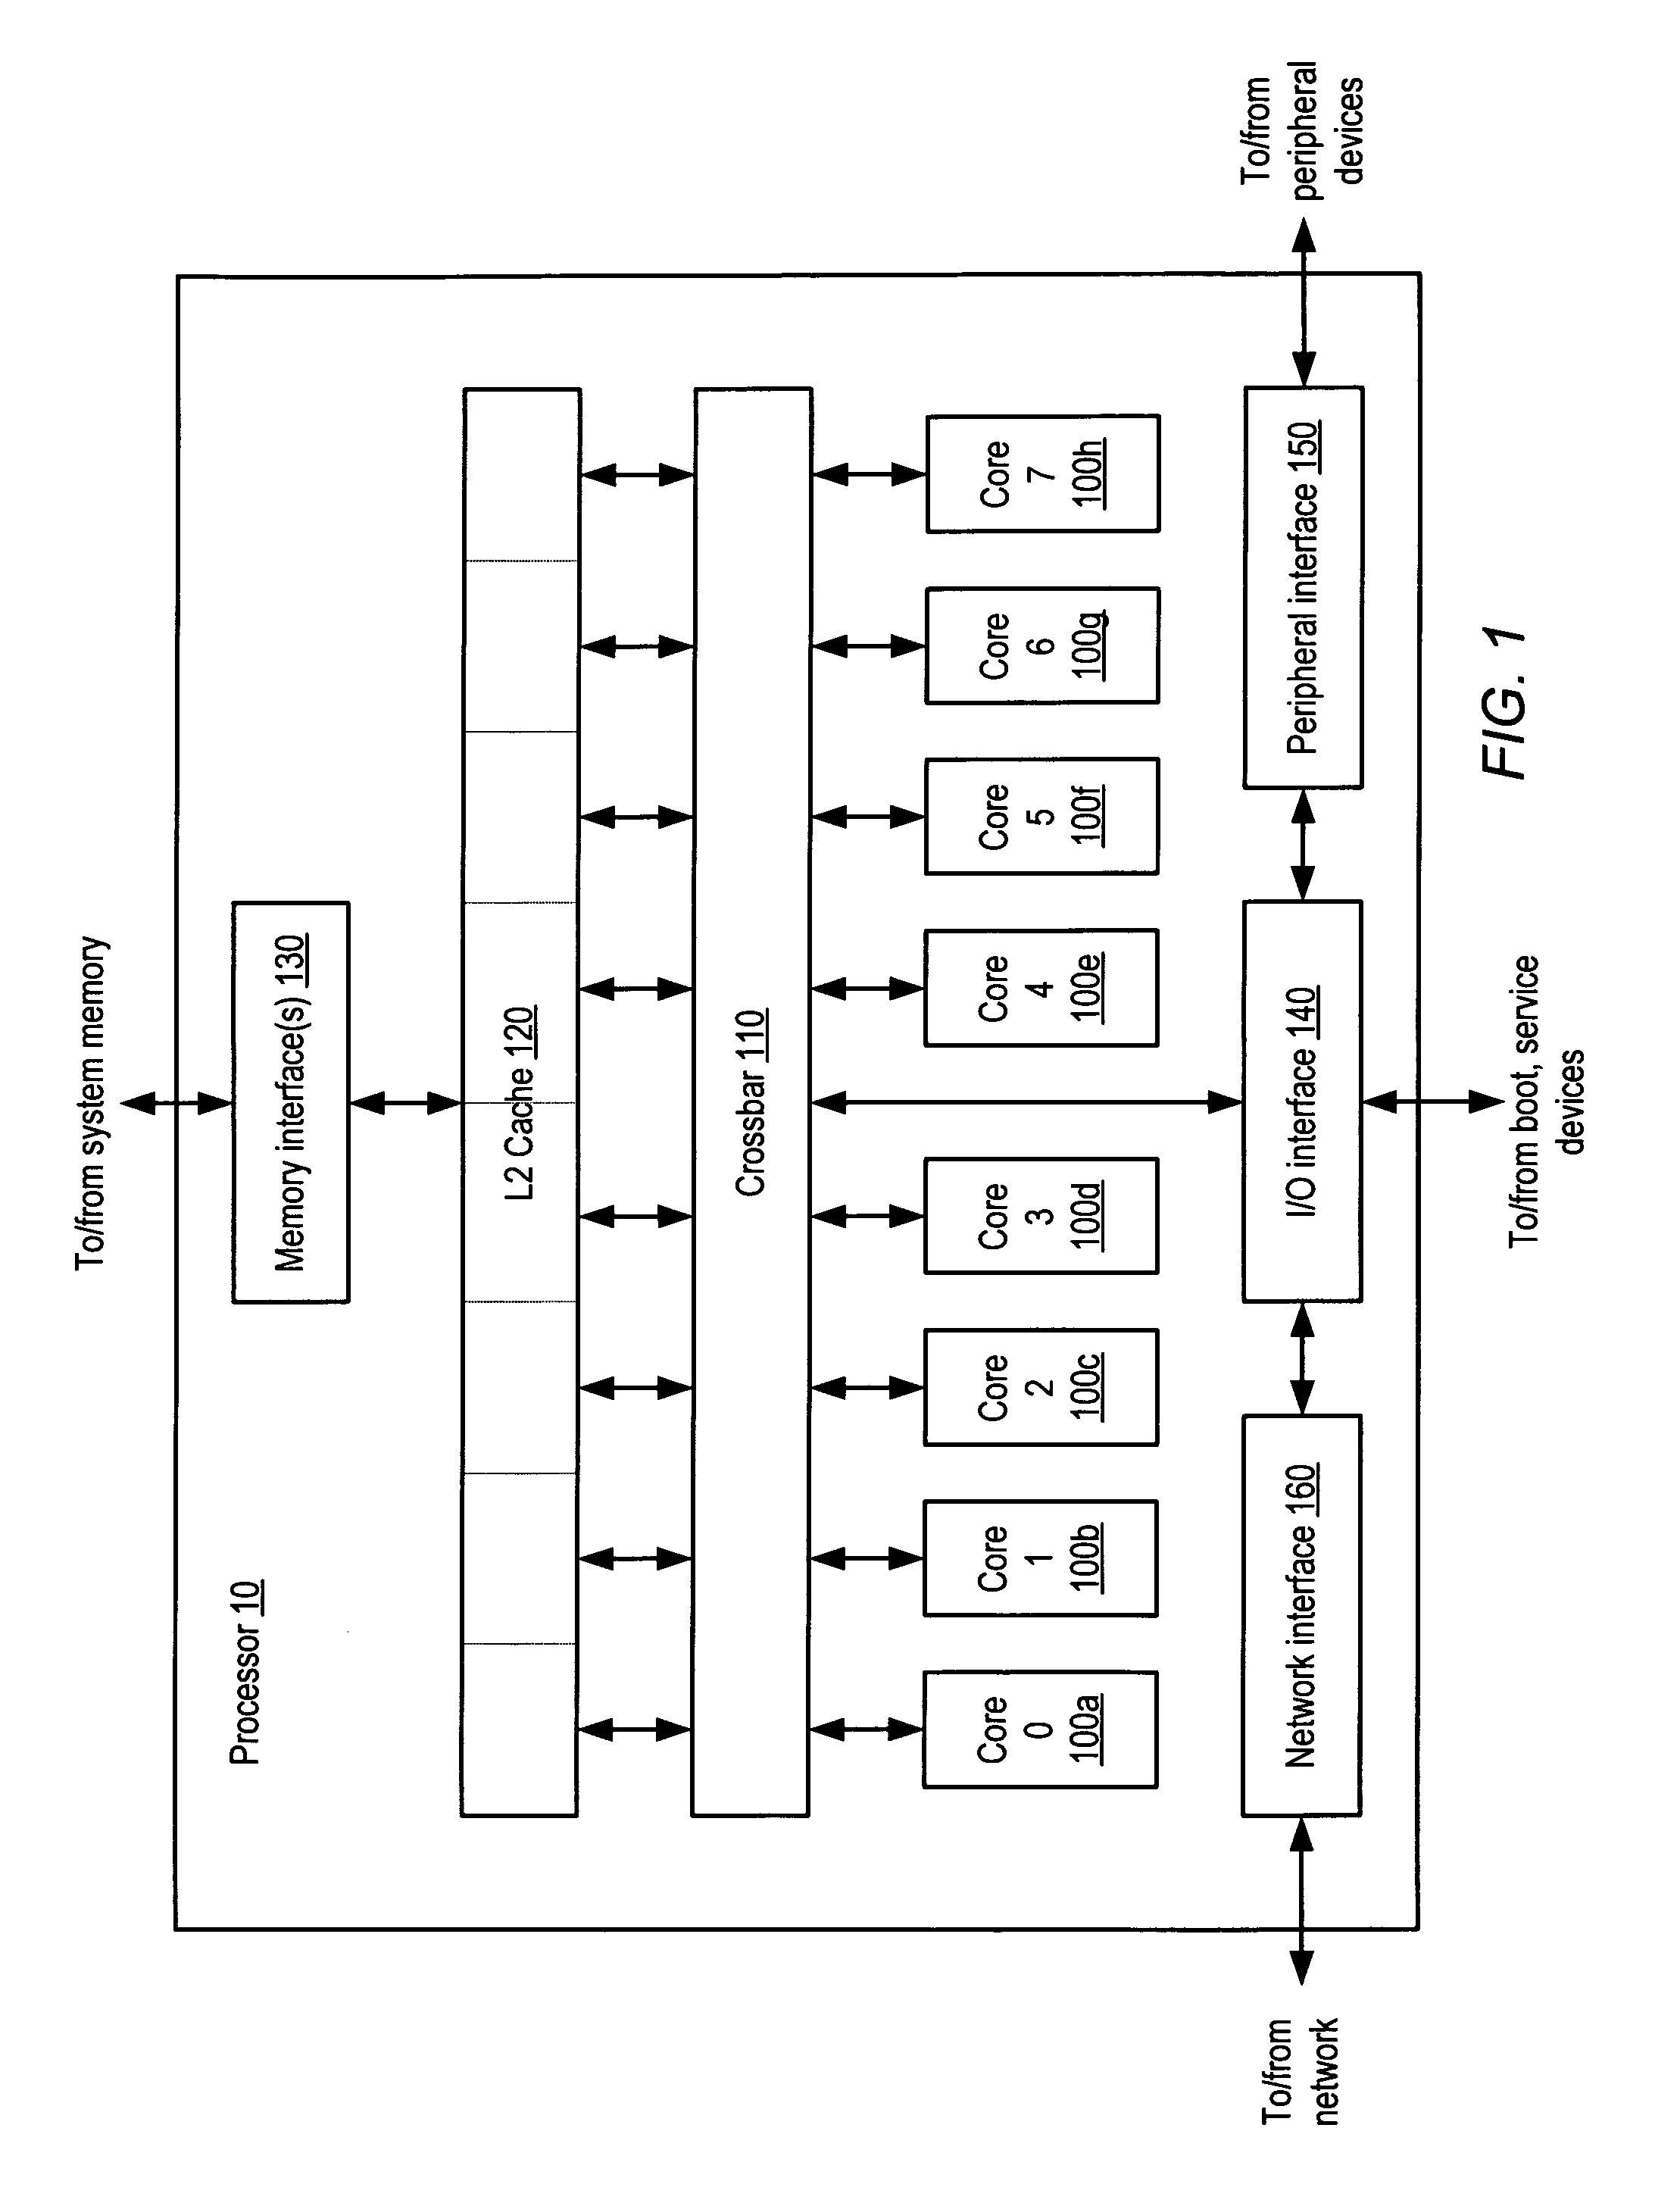 Integrated circuit with embedded test functionality